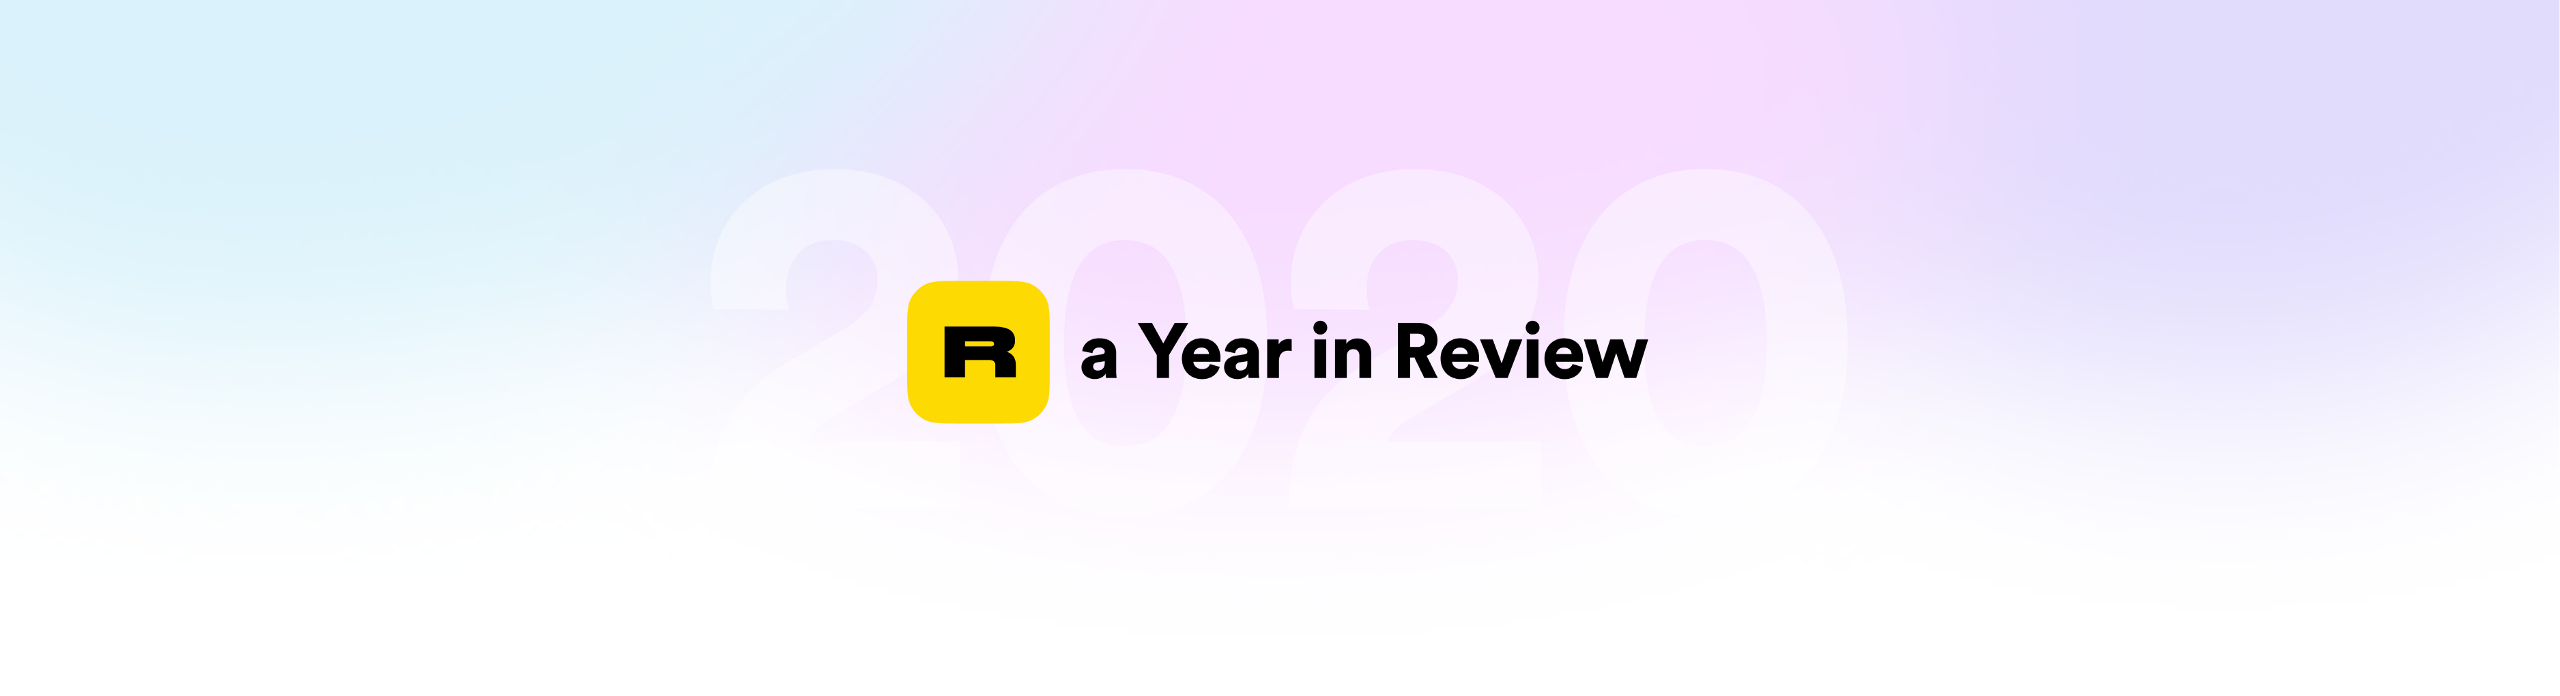 Rarible 2020: a Year in Review